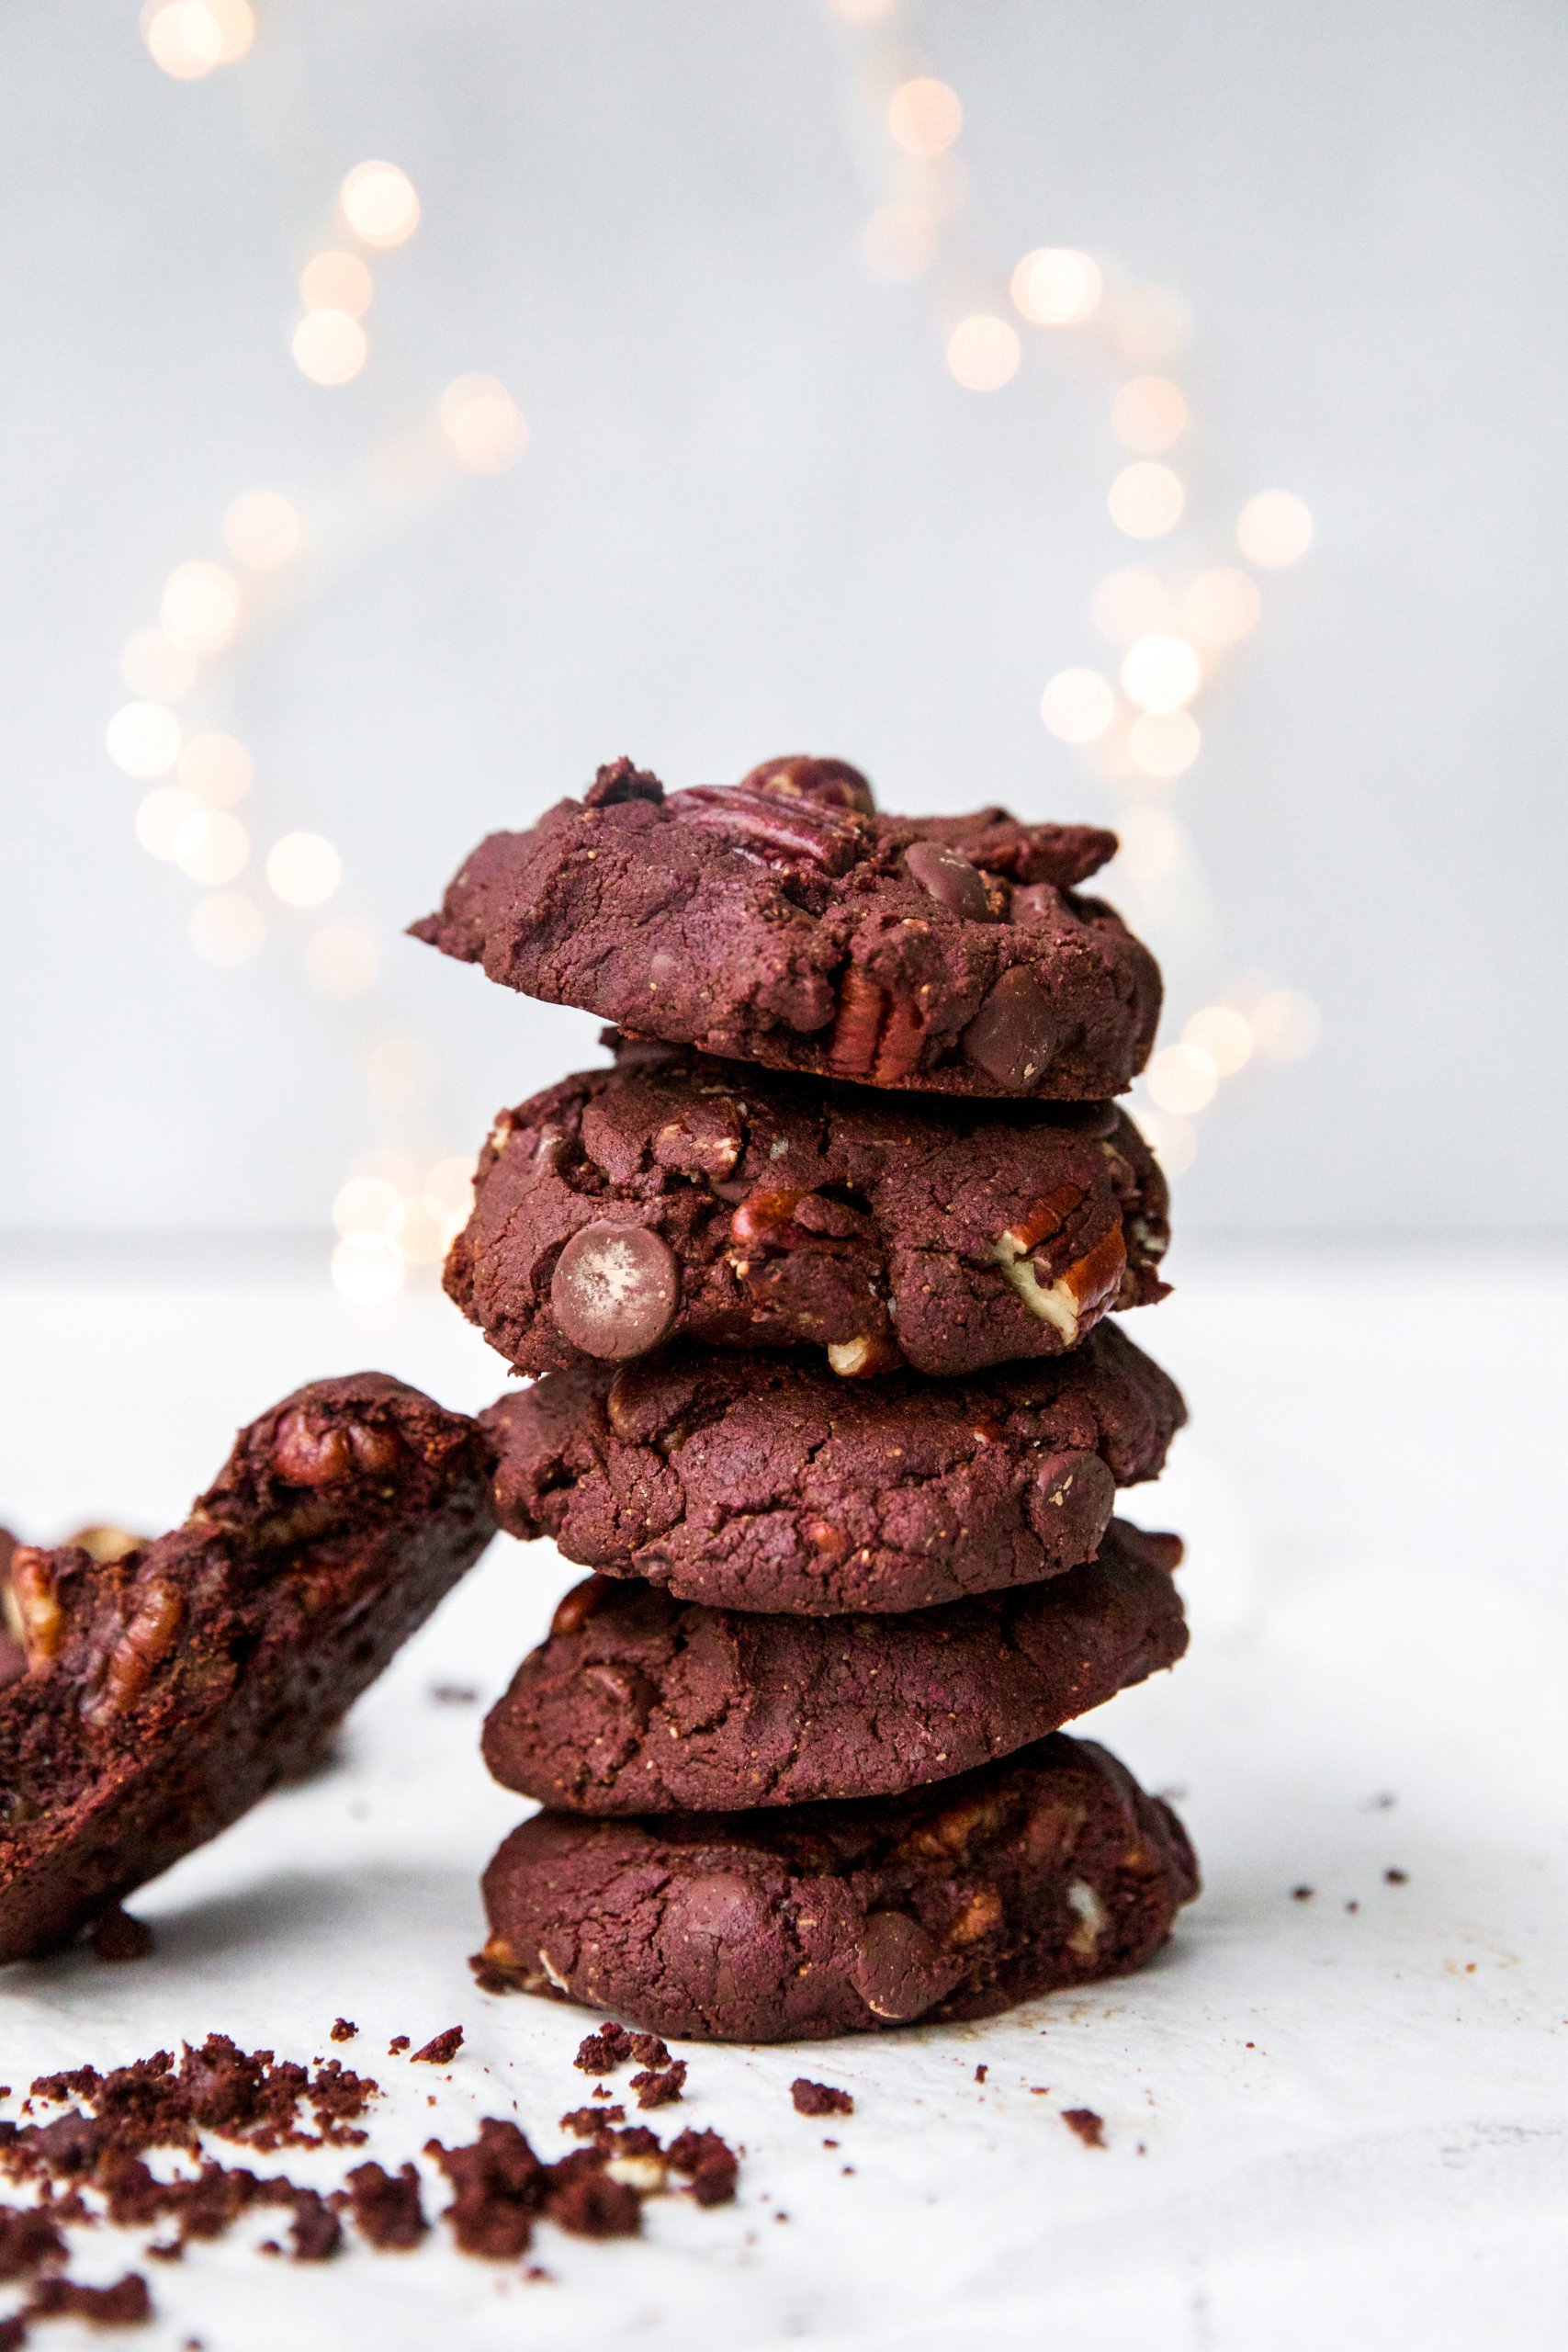 Spiced Pecan and Double Choc Cookies